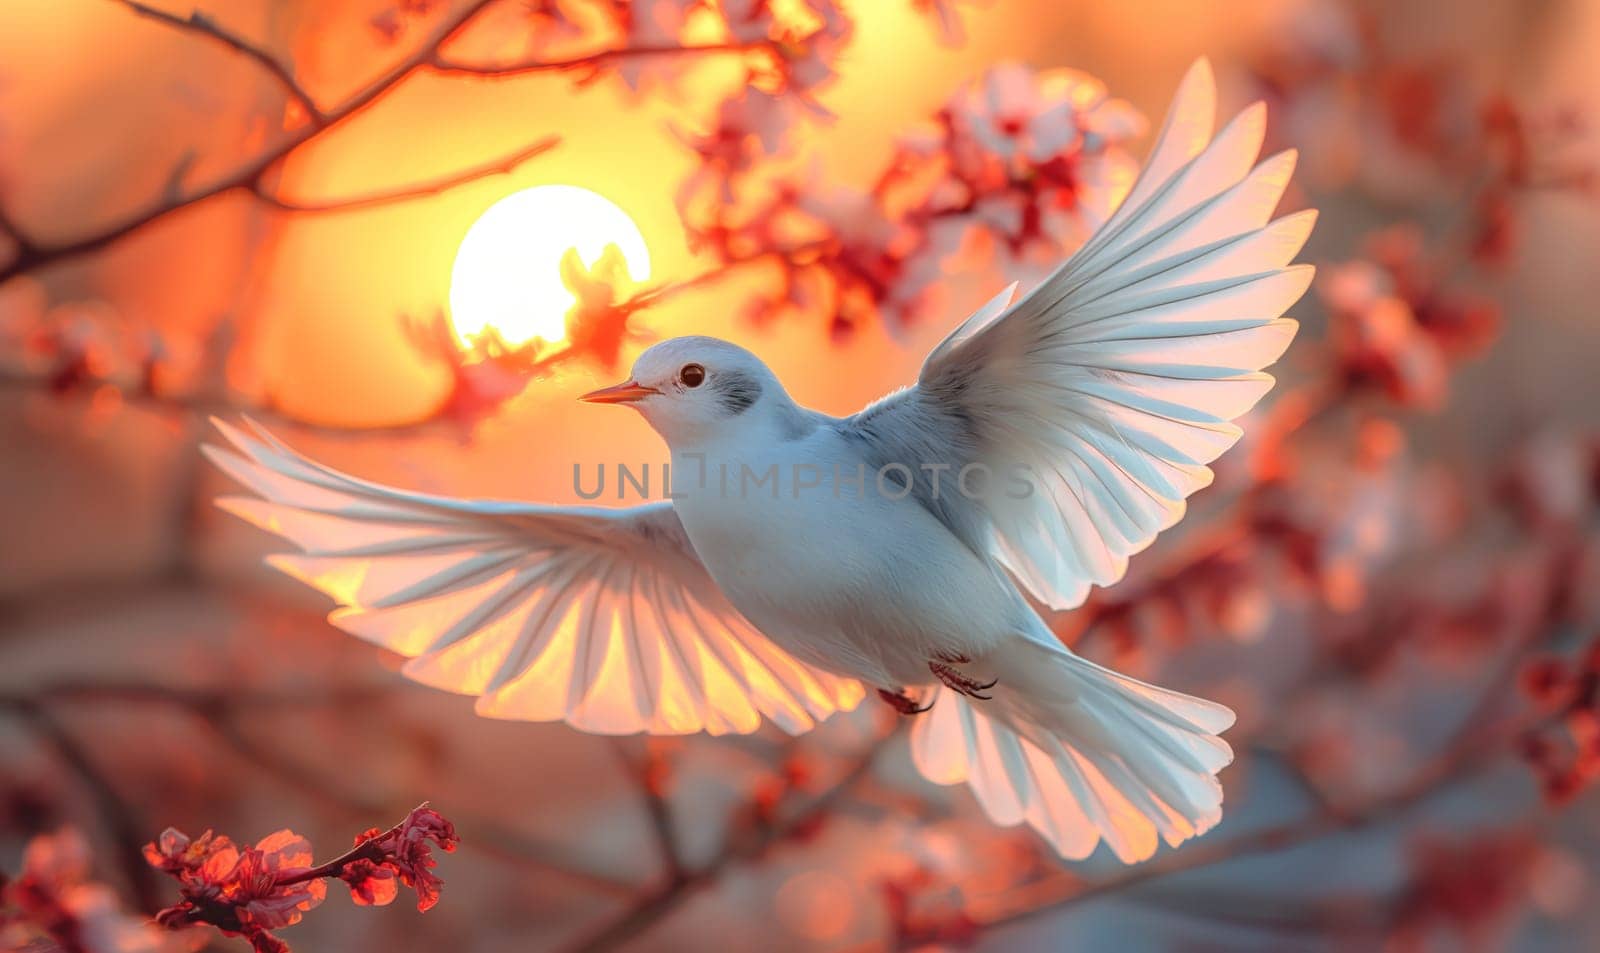 White bird flies above blooming tree with red flowers.